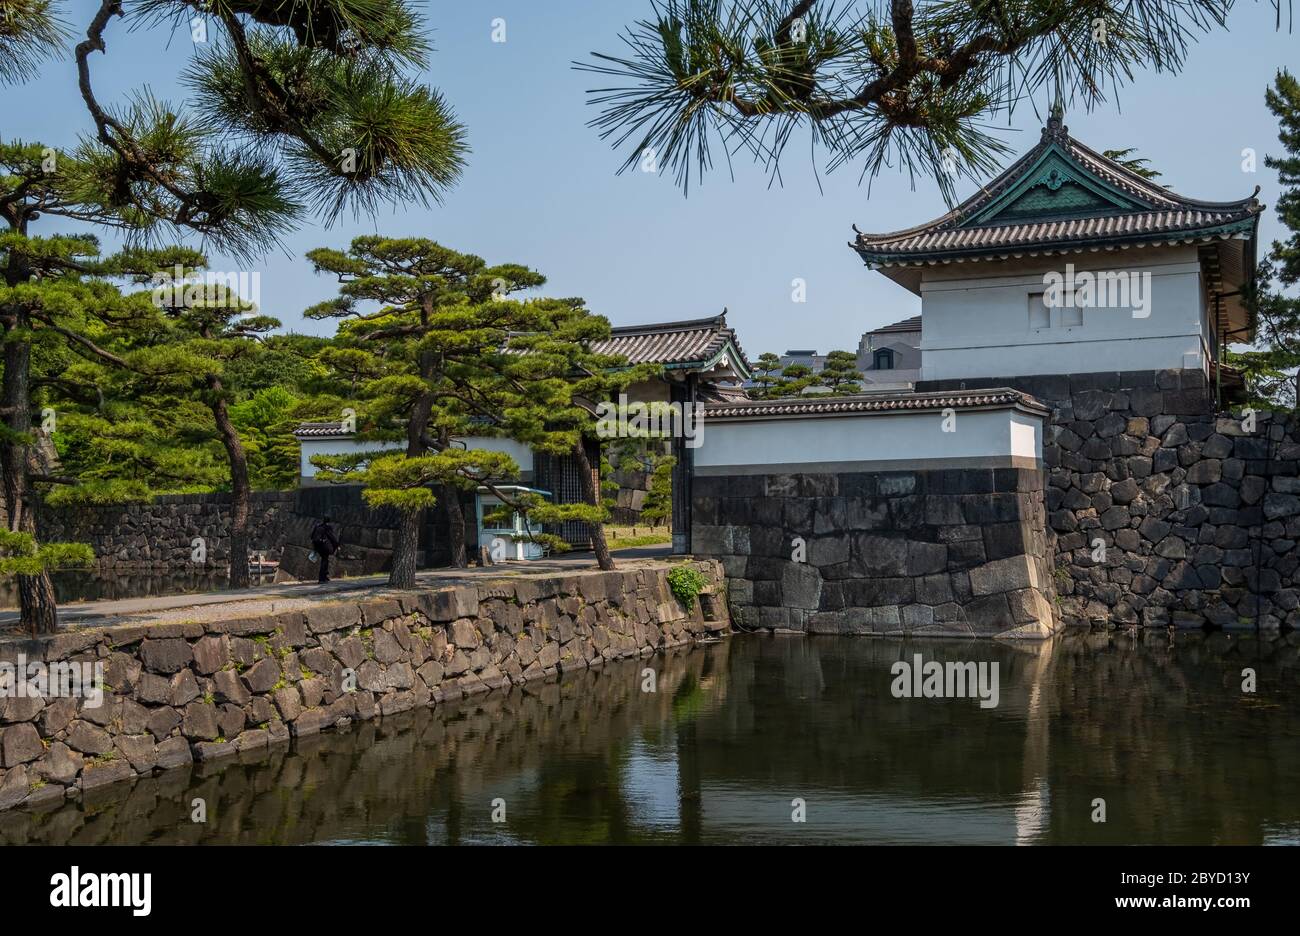 Traditional building at the Imperial Palace garden, Tokyo, Japan Stock Photo